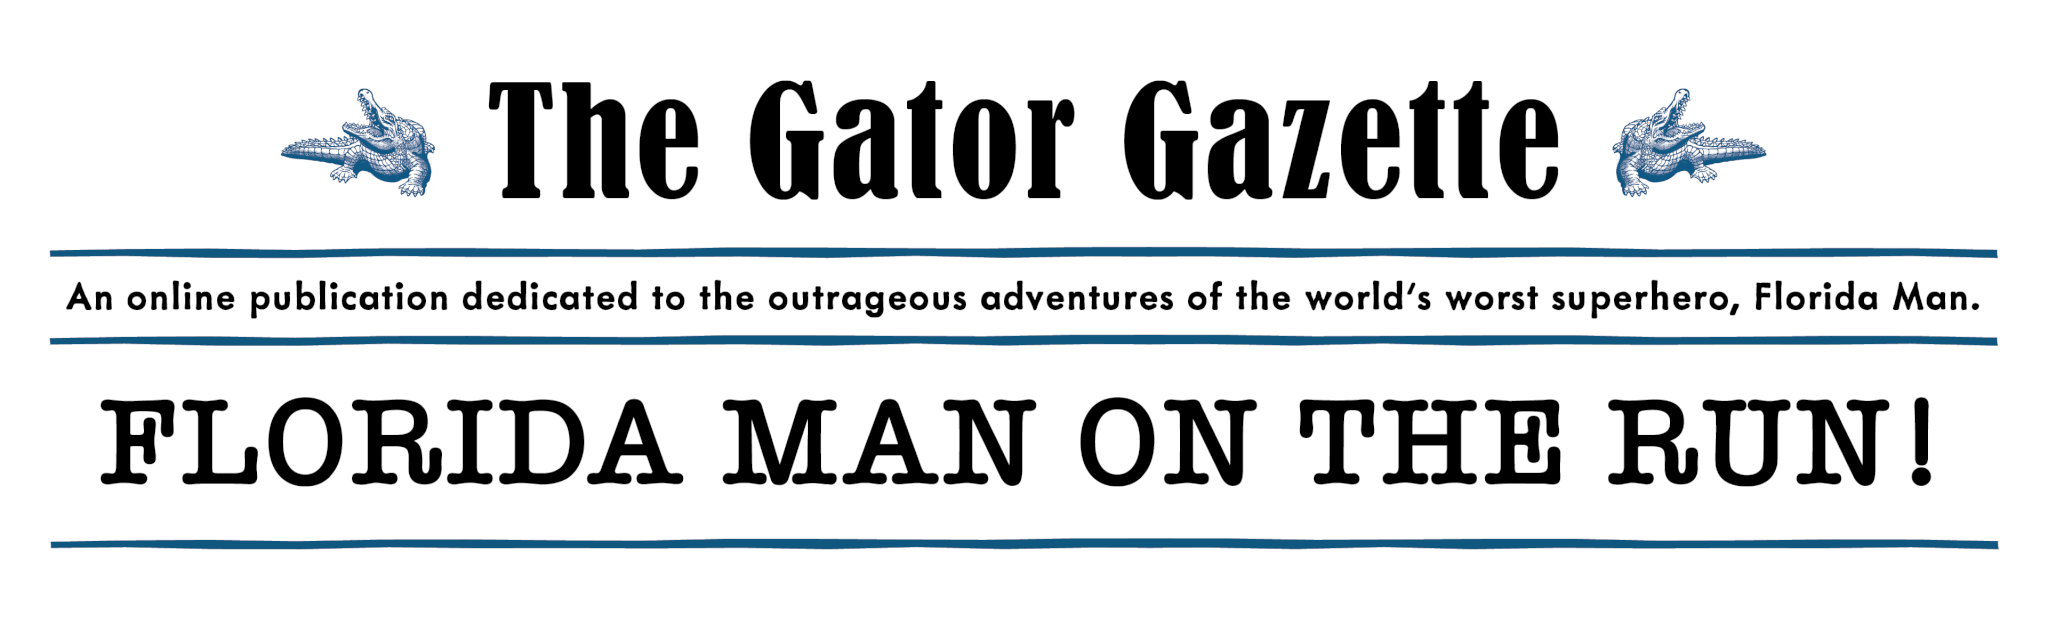 The CCB Gator Gazette: Florida Man on the Run. An online publication dedicated to the outrageous adventures of the world's worst superhero, Florida Man.